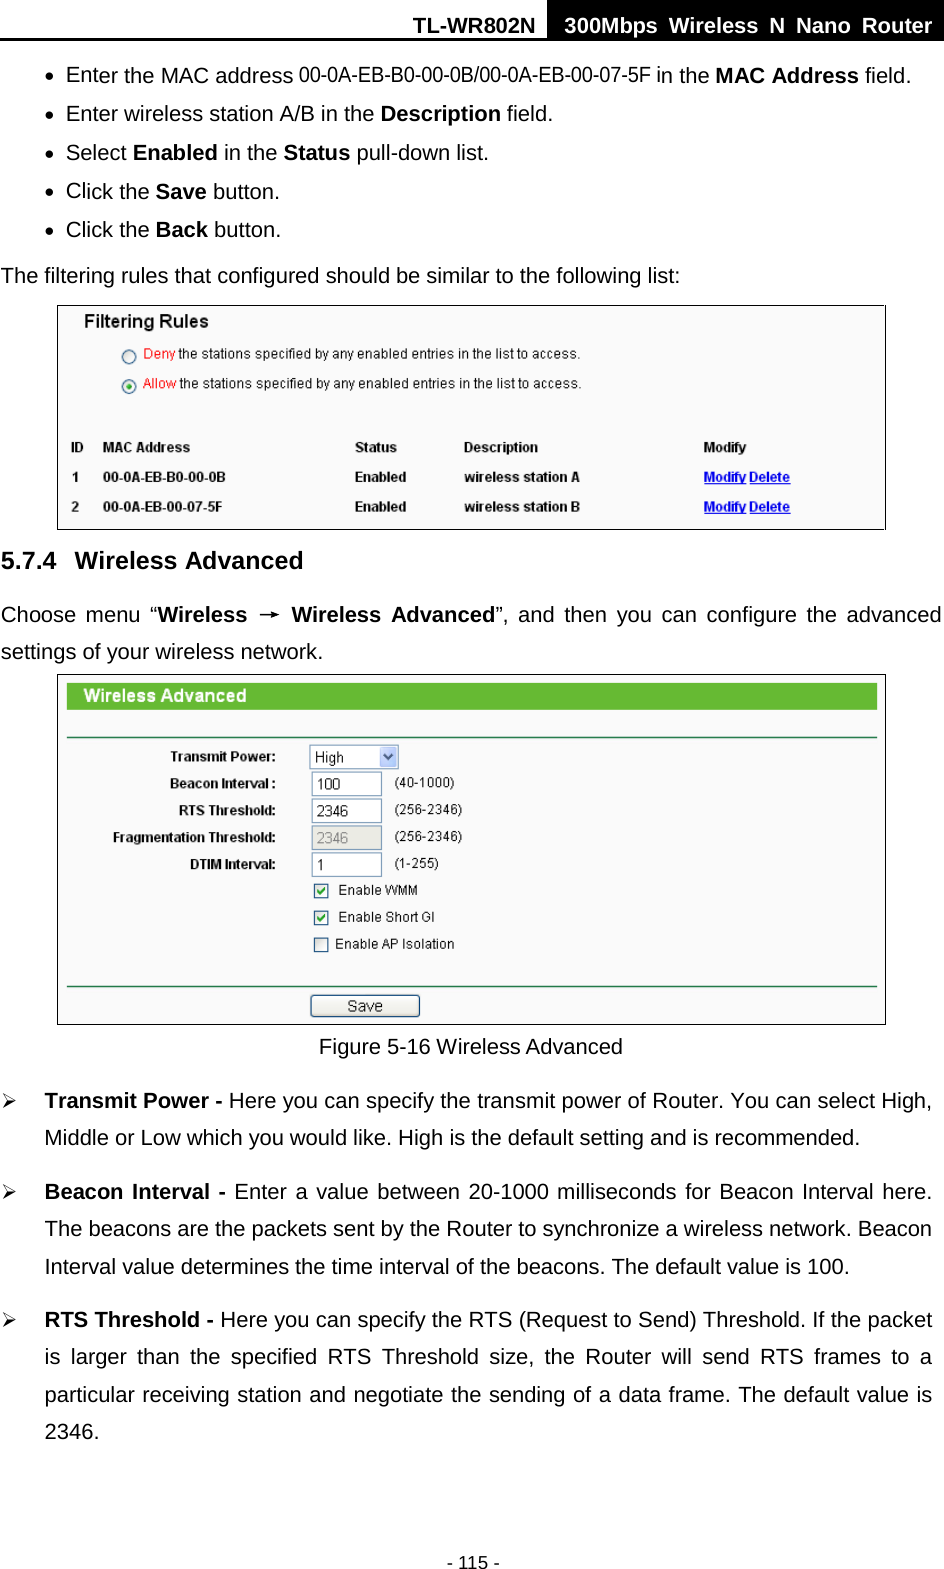 TL-WR802N  300Mbps Wireless N Nano Router  • Enter the MAC address 00-0A-EB-B0-00-0B/00-0A-EB-00-07-5F in the MAC Address field. • Enter wireless station A/B in the Description field. • Select Enabled in the Status pull-down list. • Click the Save button. • Click the Back button. The filtering rules that configured should be similar to the following list:  5.7.4 Wireless Advanced Choose menu “Wireless → Wireless Advanced”, and then you can configure the advanced settings of your wireless network.  Figure 5-16 Wireless Advanced  Transmit Power - Here you can specify the transmit power of Router. You can select High, Middle or Low which you would like. High is the default setting and is recommended.  Beacon Interval - Enter a value between 20-1000 milliseconds for Beacon Interval here. The beacons are the packets sent by the Router to synchronize a wireless network. Beacon Interval value determines the time interval of the beacons. The default value is 100.    RTS Threshold - Here you can specify the RTS (Request to Send) Threshold. If the packet is larger than the specified RTS Threshold size, the Router will send RTS frames to a particular receiving station and negotiate the sending of a data frame. The default value is 2346.   - 115 - 